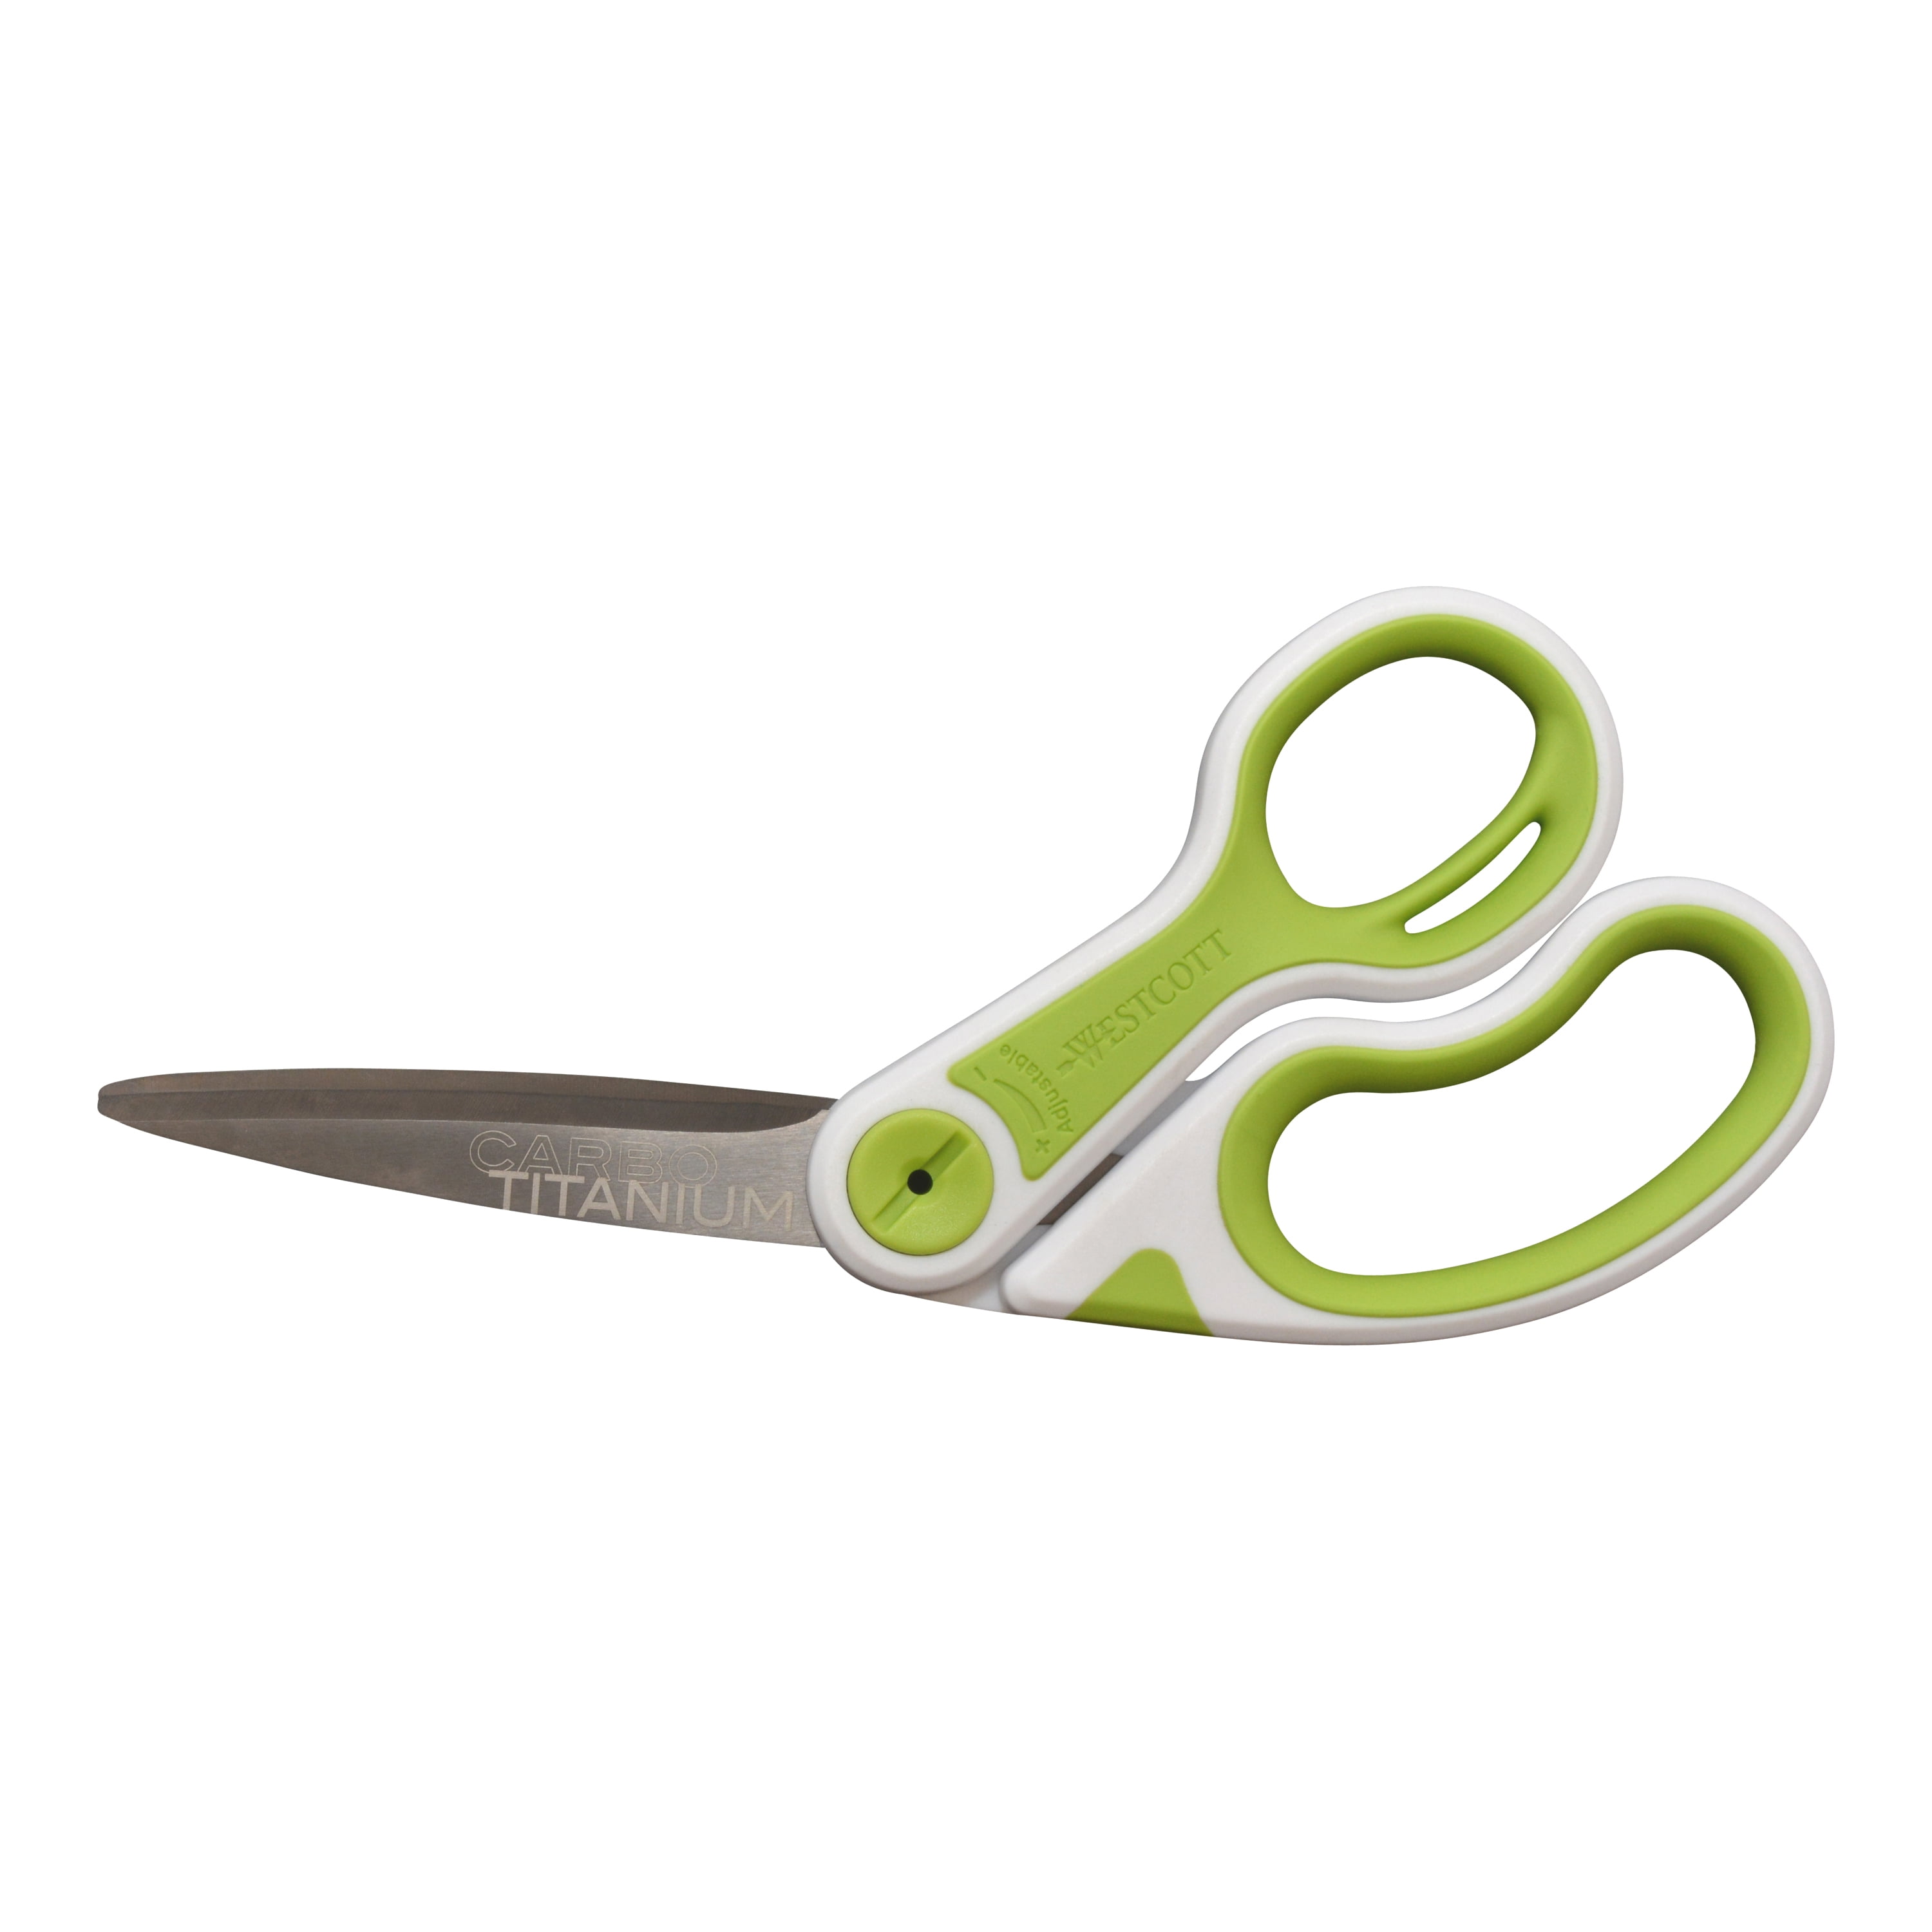 Westcott Carbo Titanium Scissors, 8 inch, Bent, Adjustable Glide, Green, White, for Sewing, 1-Count